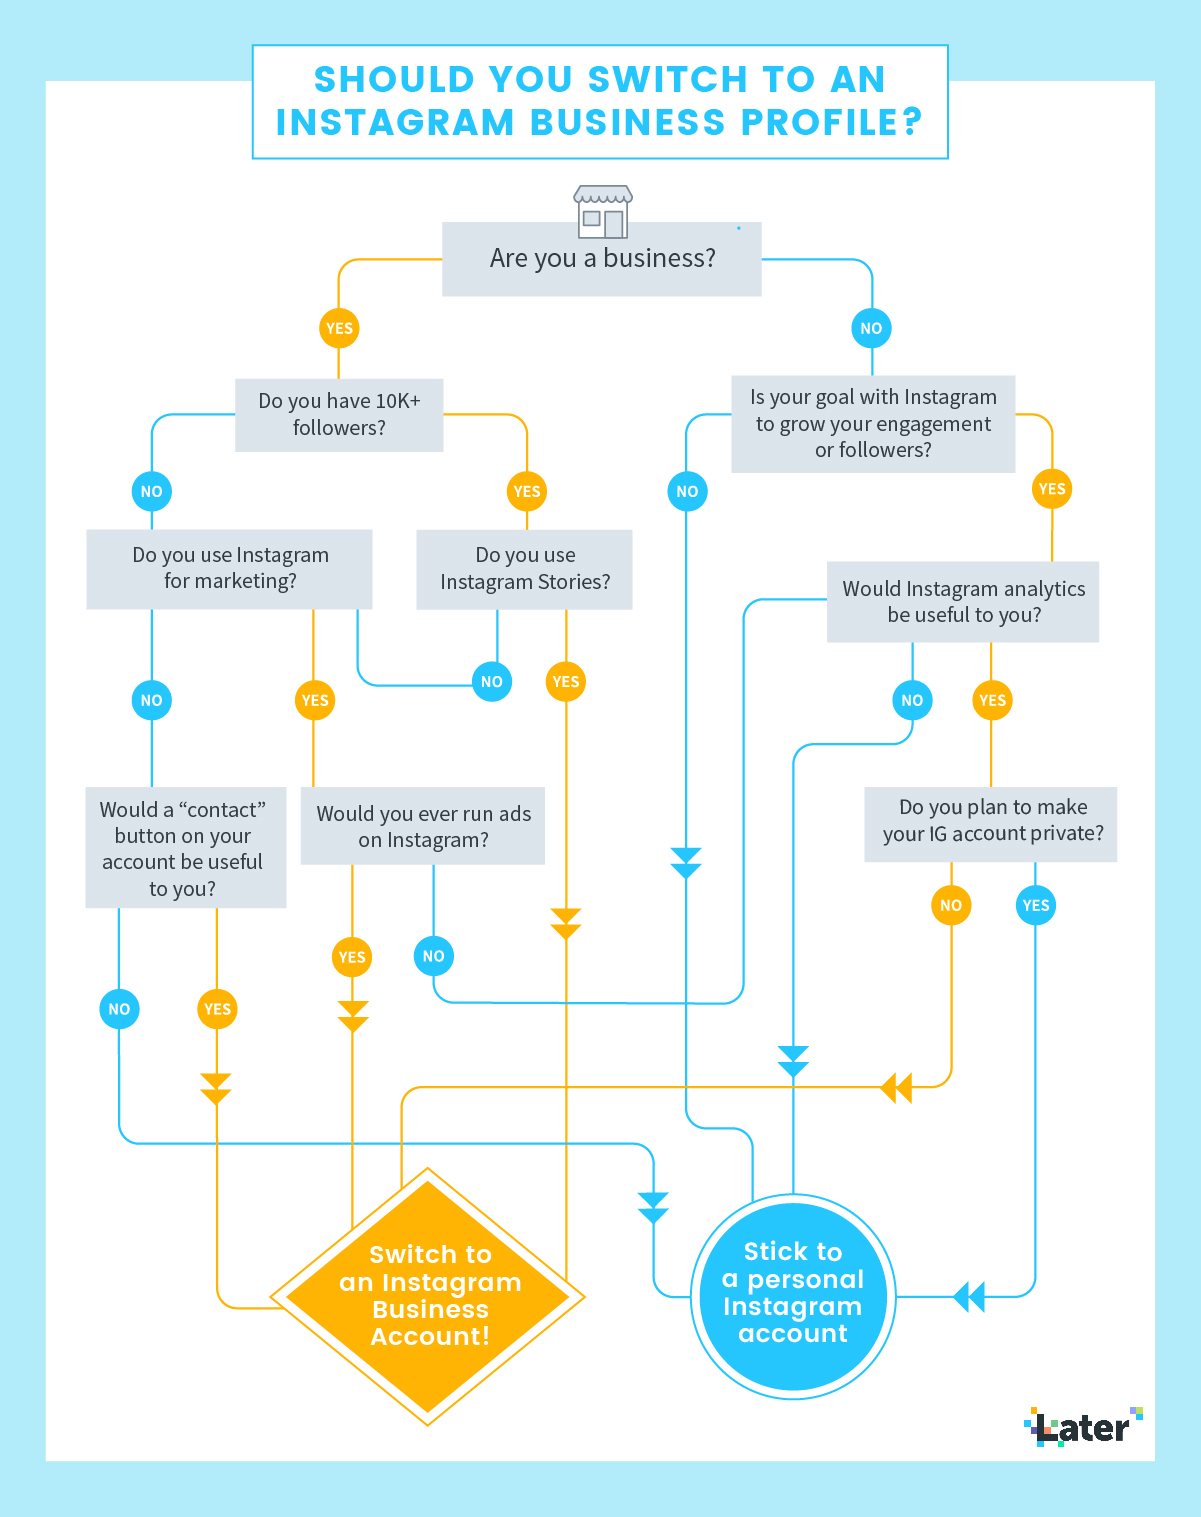 Infographic on decision tree to switch to Instagram Business Account in McKinney and Frisco